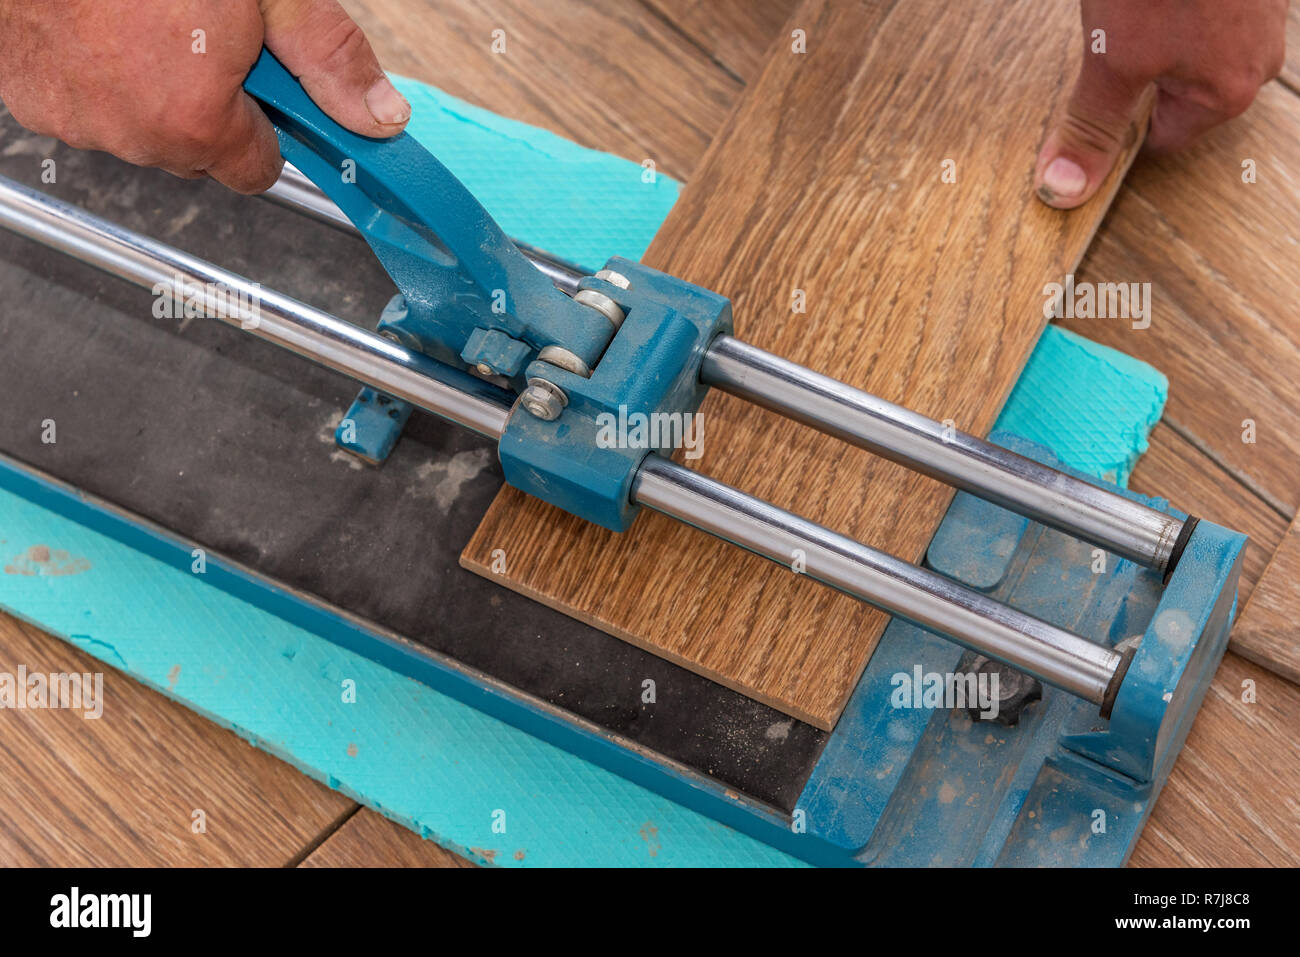 The man is cutting the floor tiles using a tile cutter machine Stock Photo  - Alamy